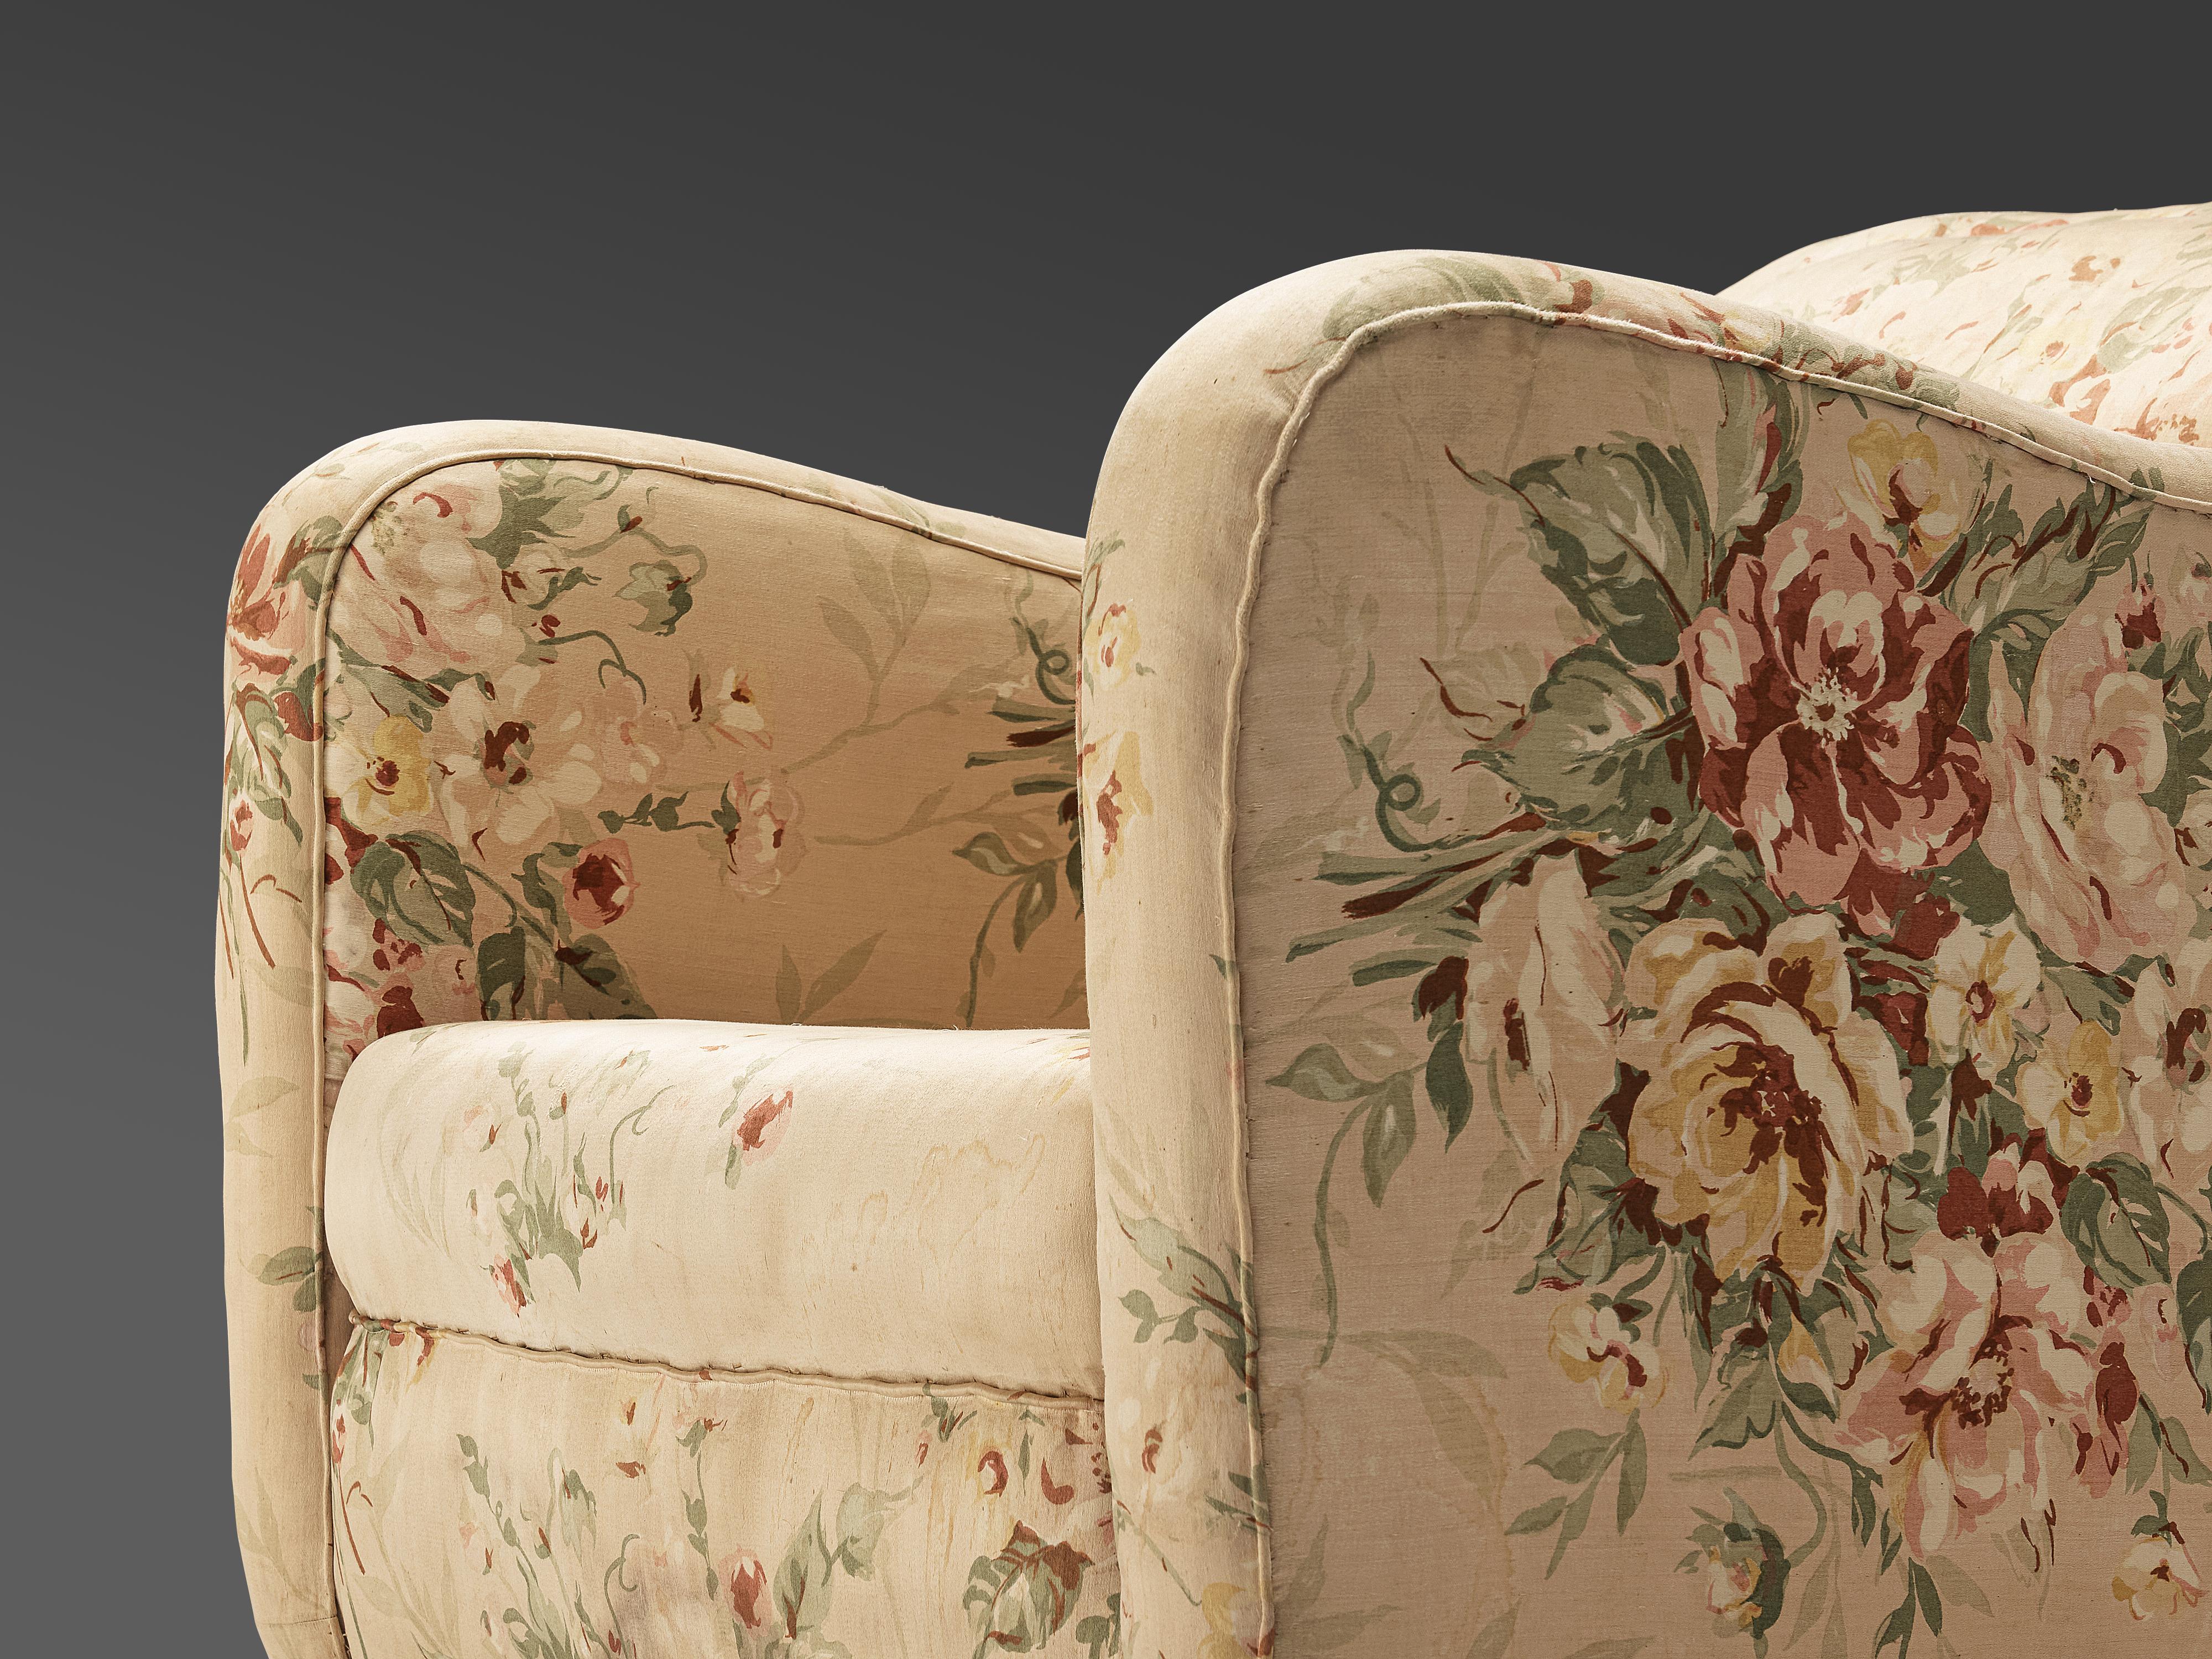 Art Deco Melchiorre Bega Pair of Lounge Chairs in Floral Upholstery, 1930s